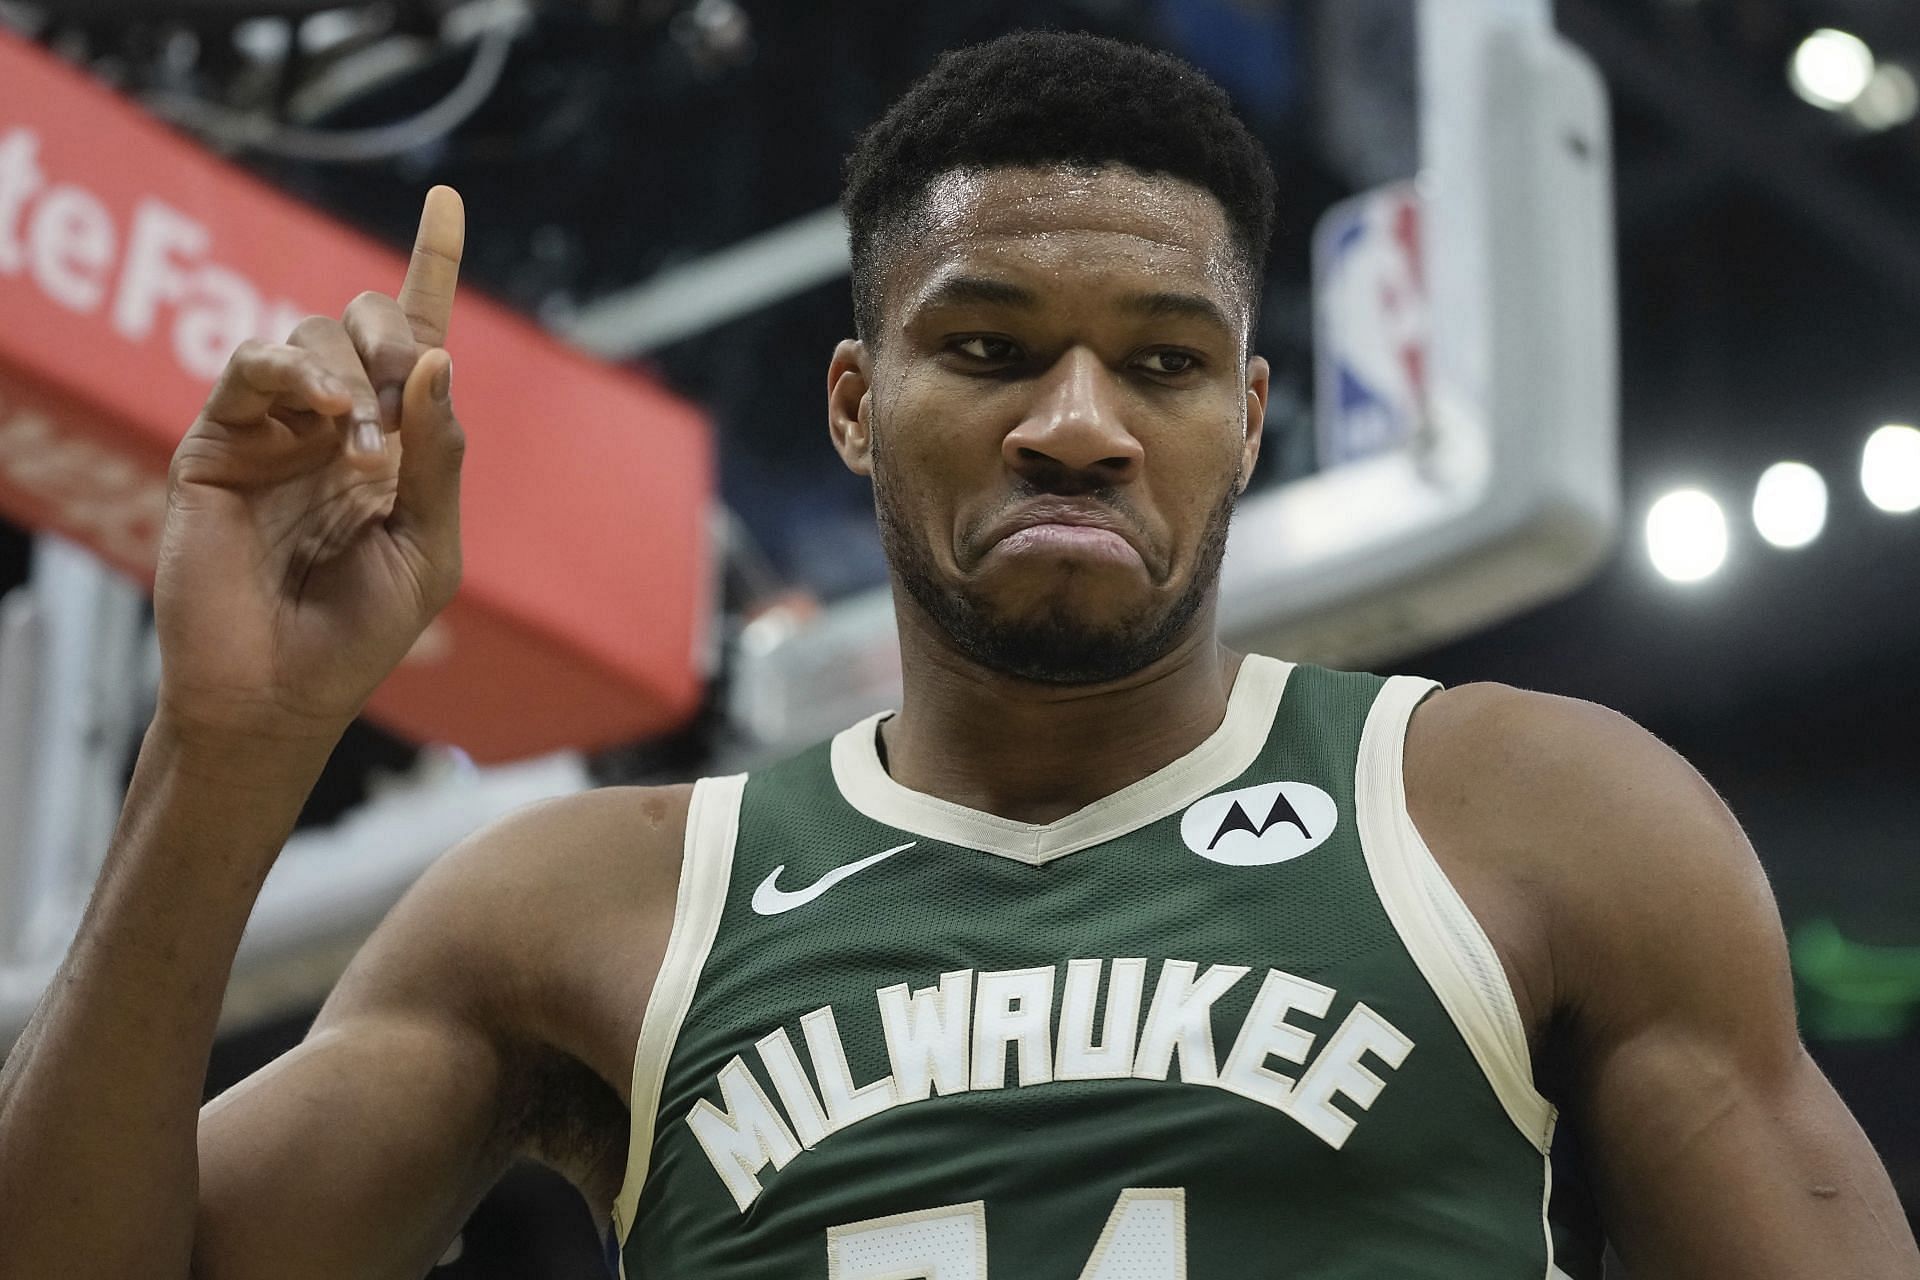 After monstrous 64-point game, ESPN host makes bold claim about Giannis Antetokounmpo